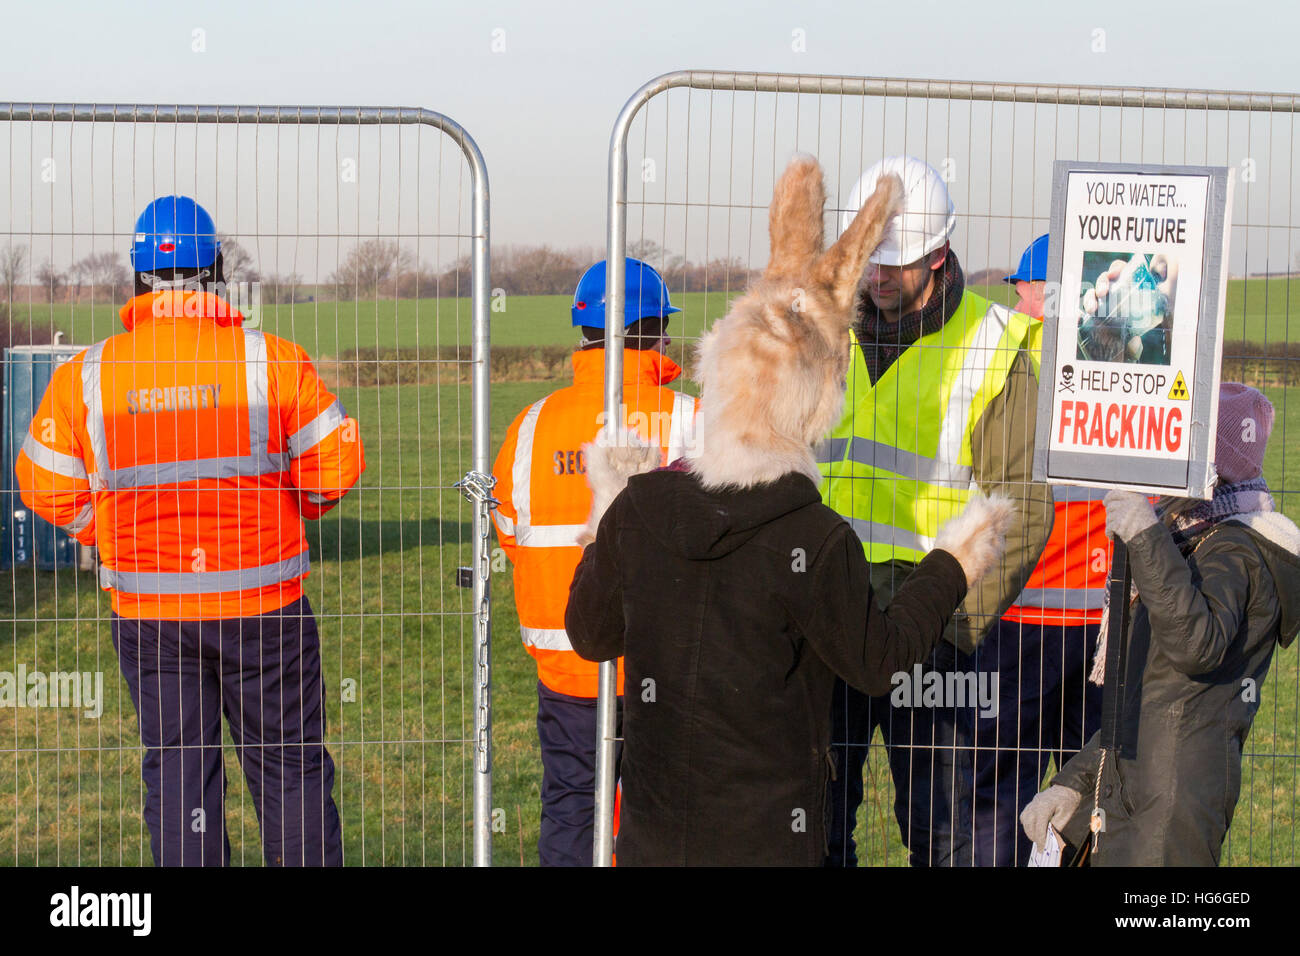 Little Plumpton, Lancashire, UK. 5th Jan 2017. 'Hop It'  Help stop fracking demonstrators protest as Security moves into the heavily protected area of Little Plumpton, a site designated for the installation of four wells for shale gas extraction by the notorious 'Fracking' process. Protesters claim this fracturing process is linked to water pollution, ill health and earthquakes. This controversial Cuadrilla 'Fracking' site was approved on appeal by Communities Secretary Sajid Javid in early December 2016, overturning Lancashire County Councils previous refusal. © Cernan Elias/Alamy Live News Stock Photo